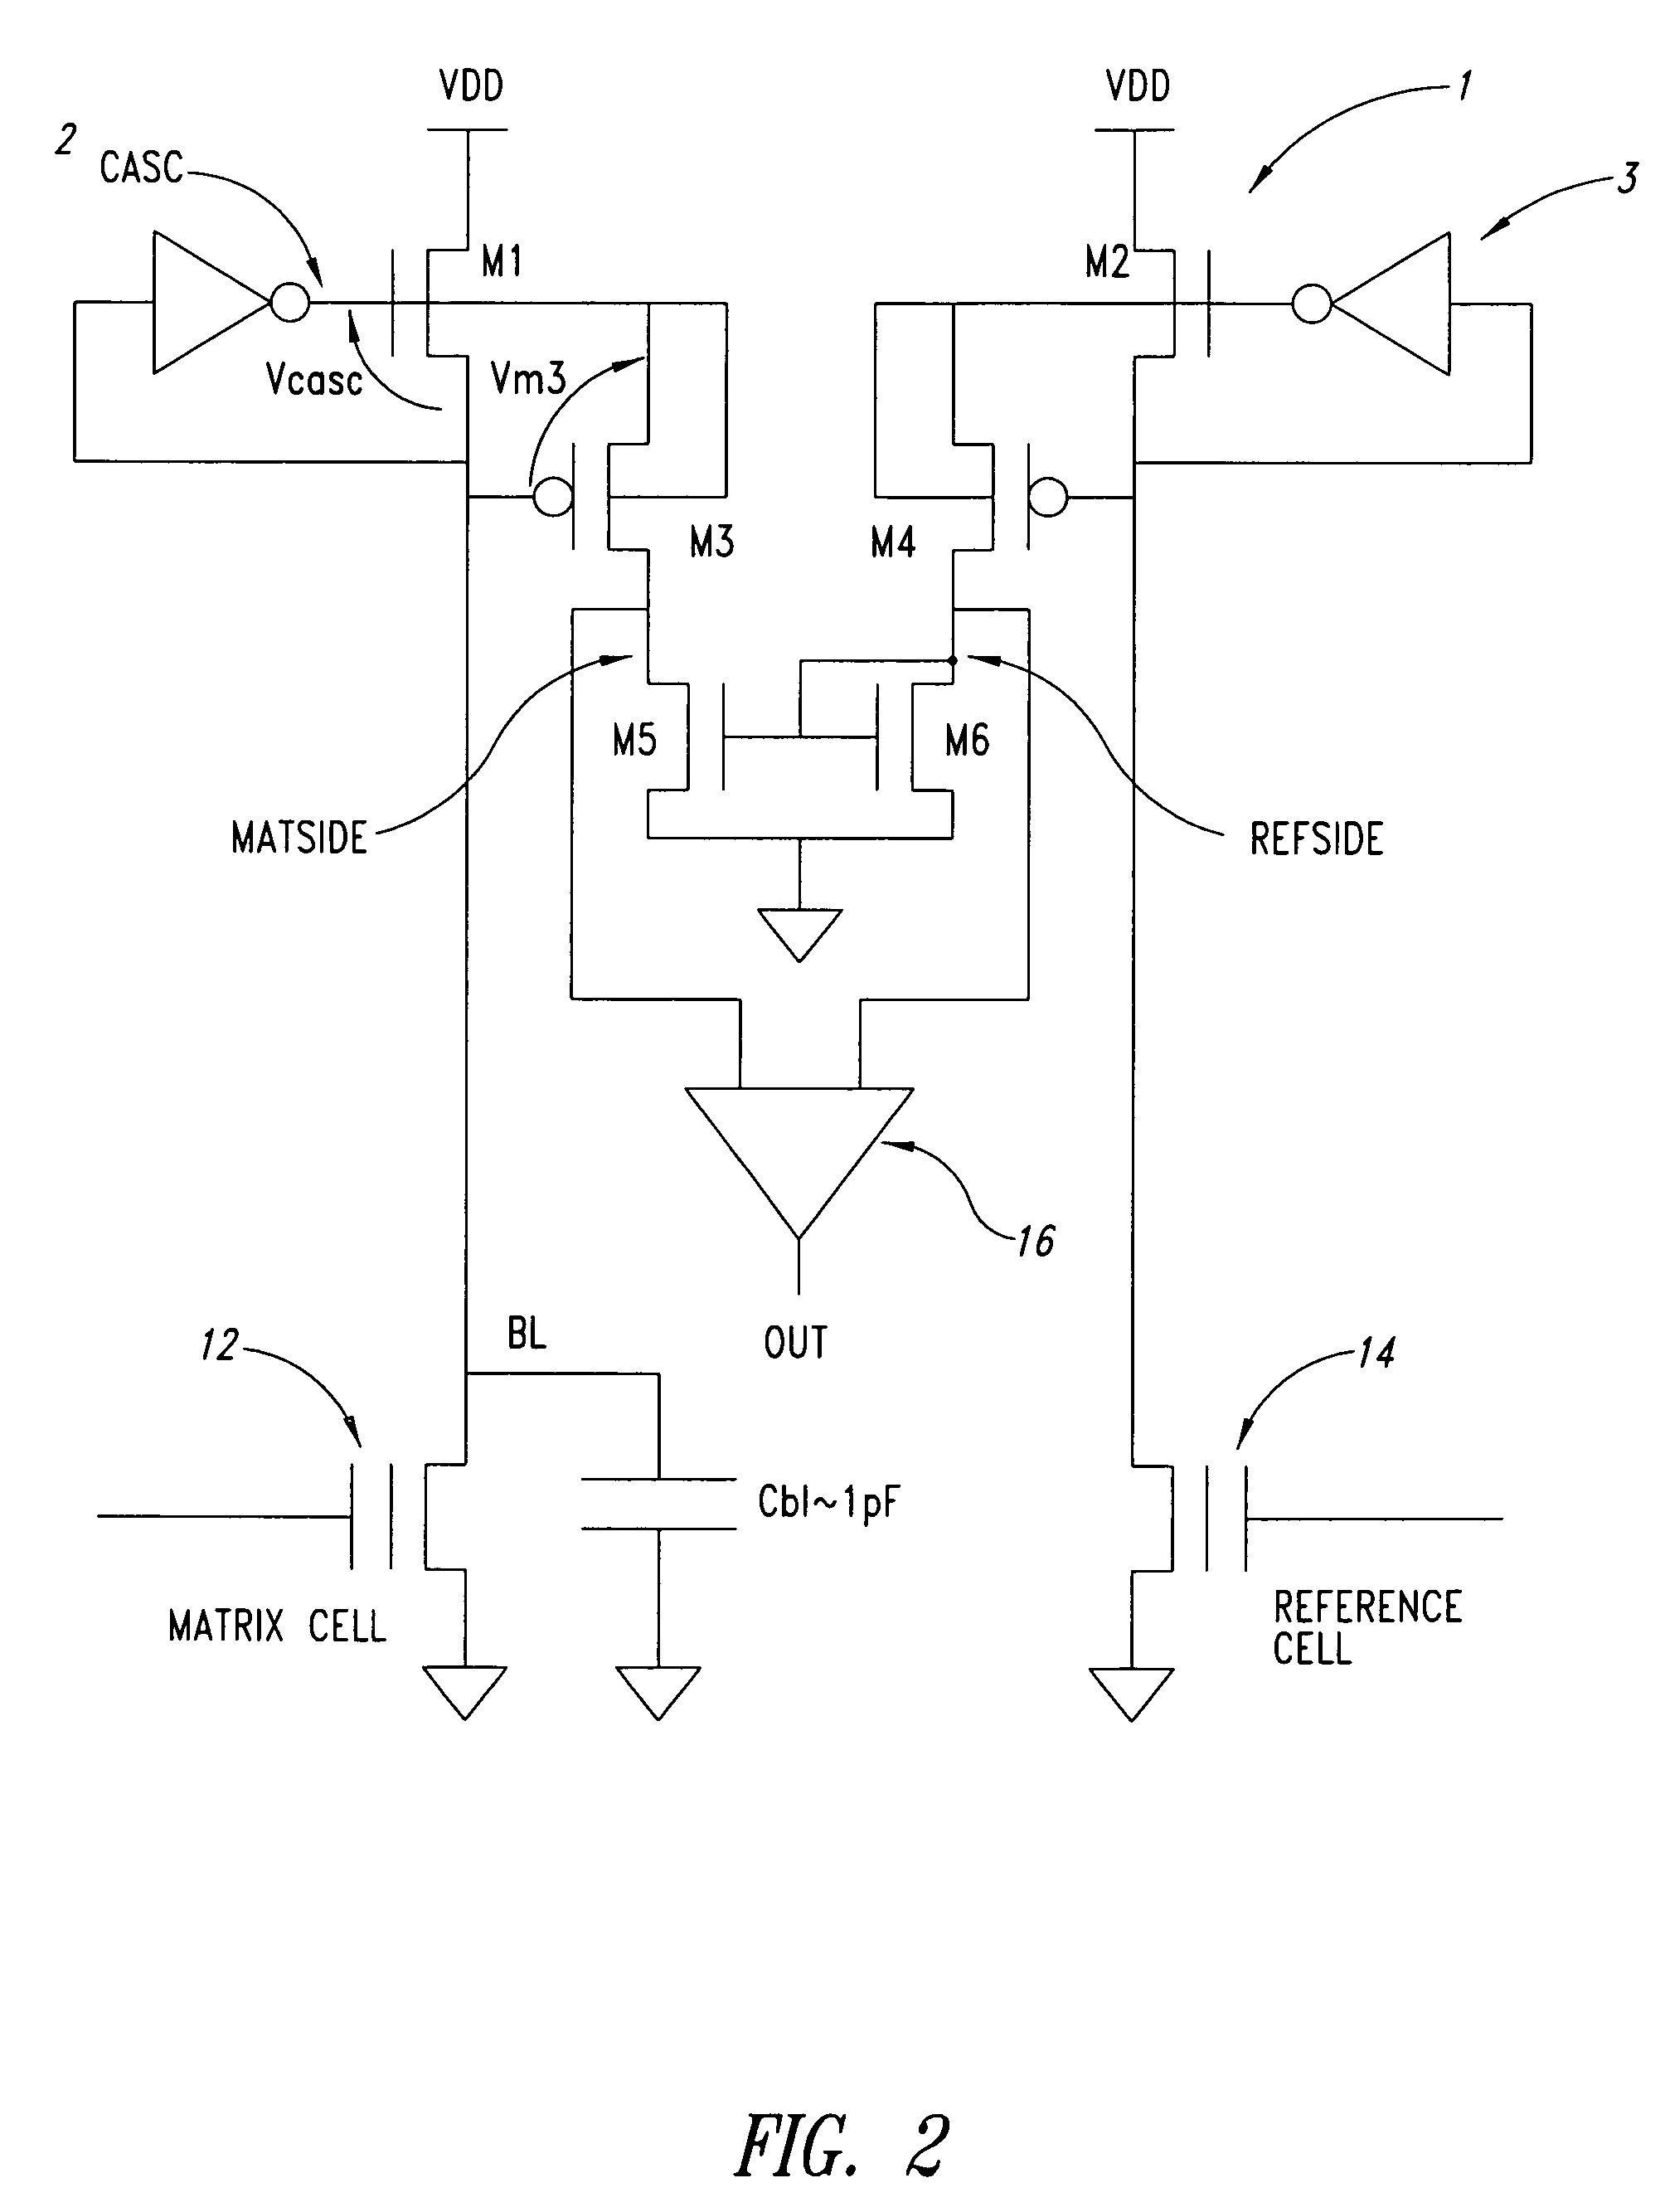 Current sense amplifier for low voltage applications with direct sensing on the bitline of a memory matrix